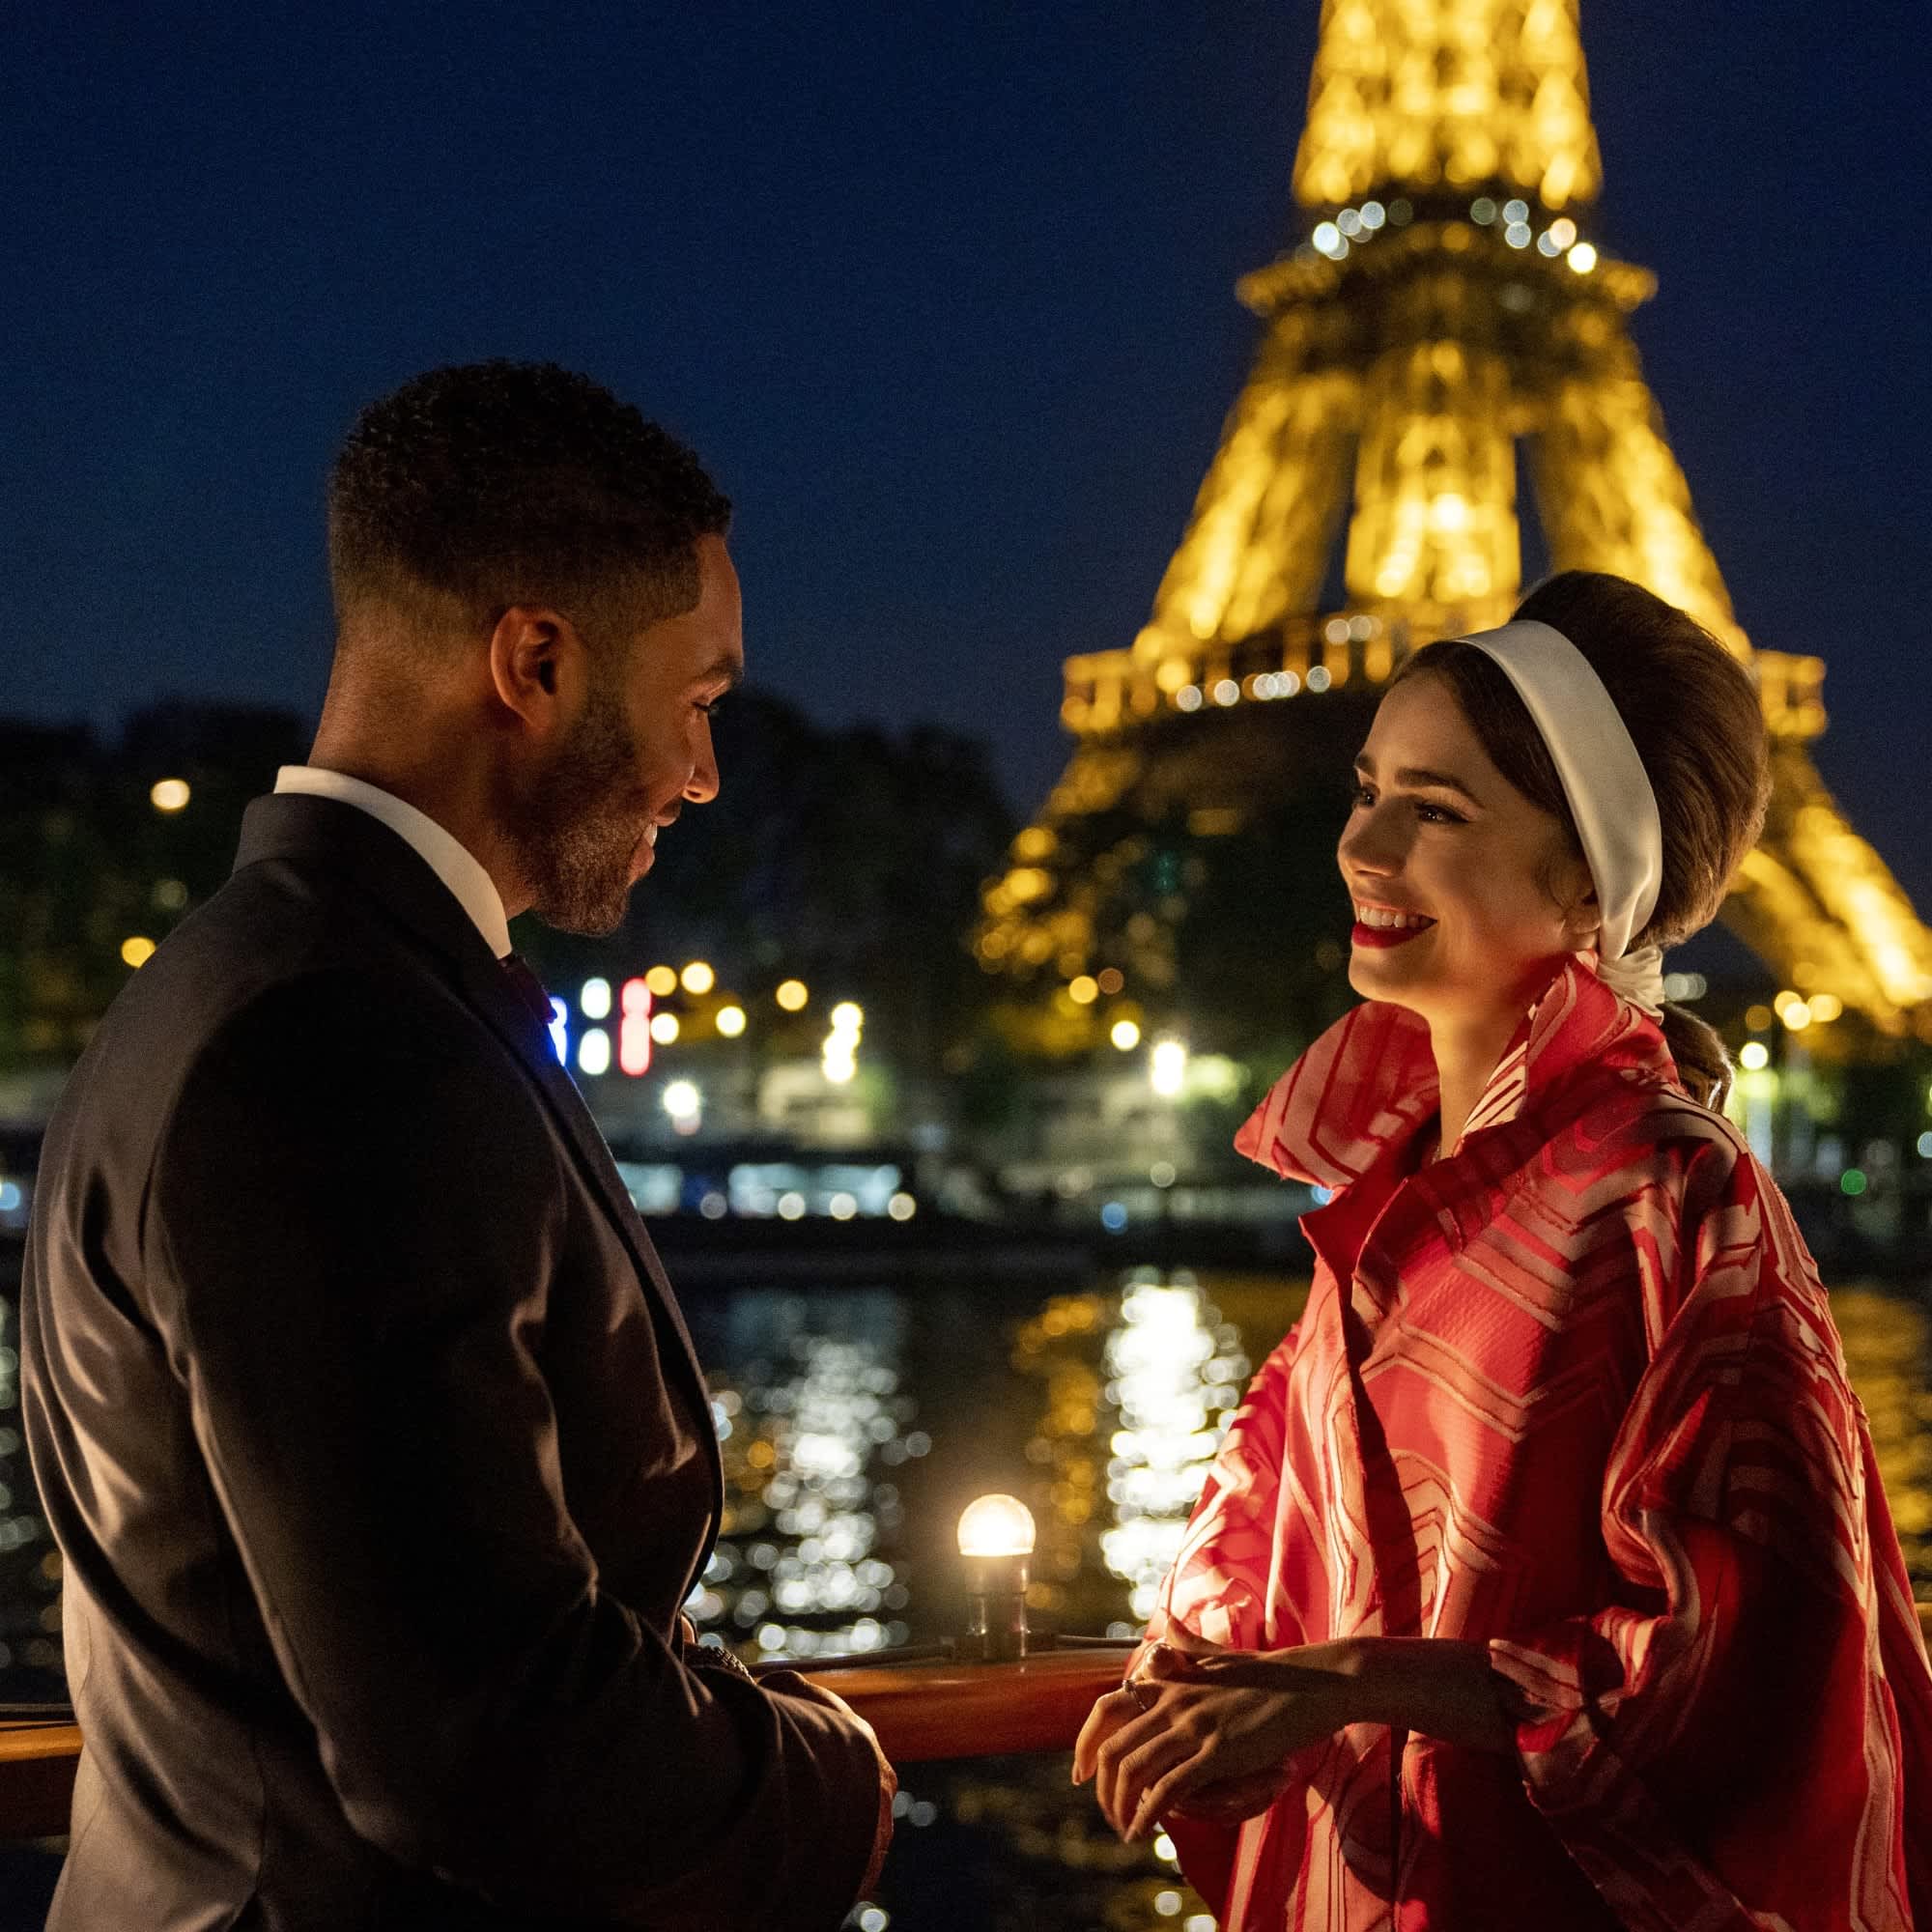 From Love Squares To A New Savoir Heres What Happened In Emily In Paris Season 2 Popsugar